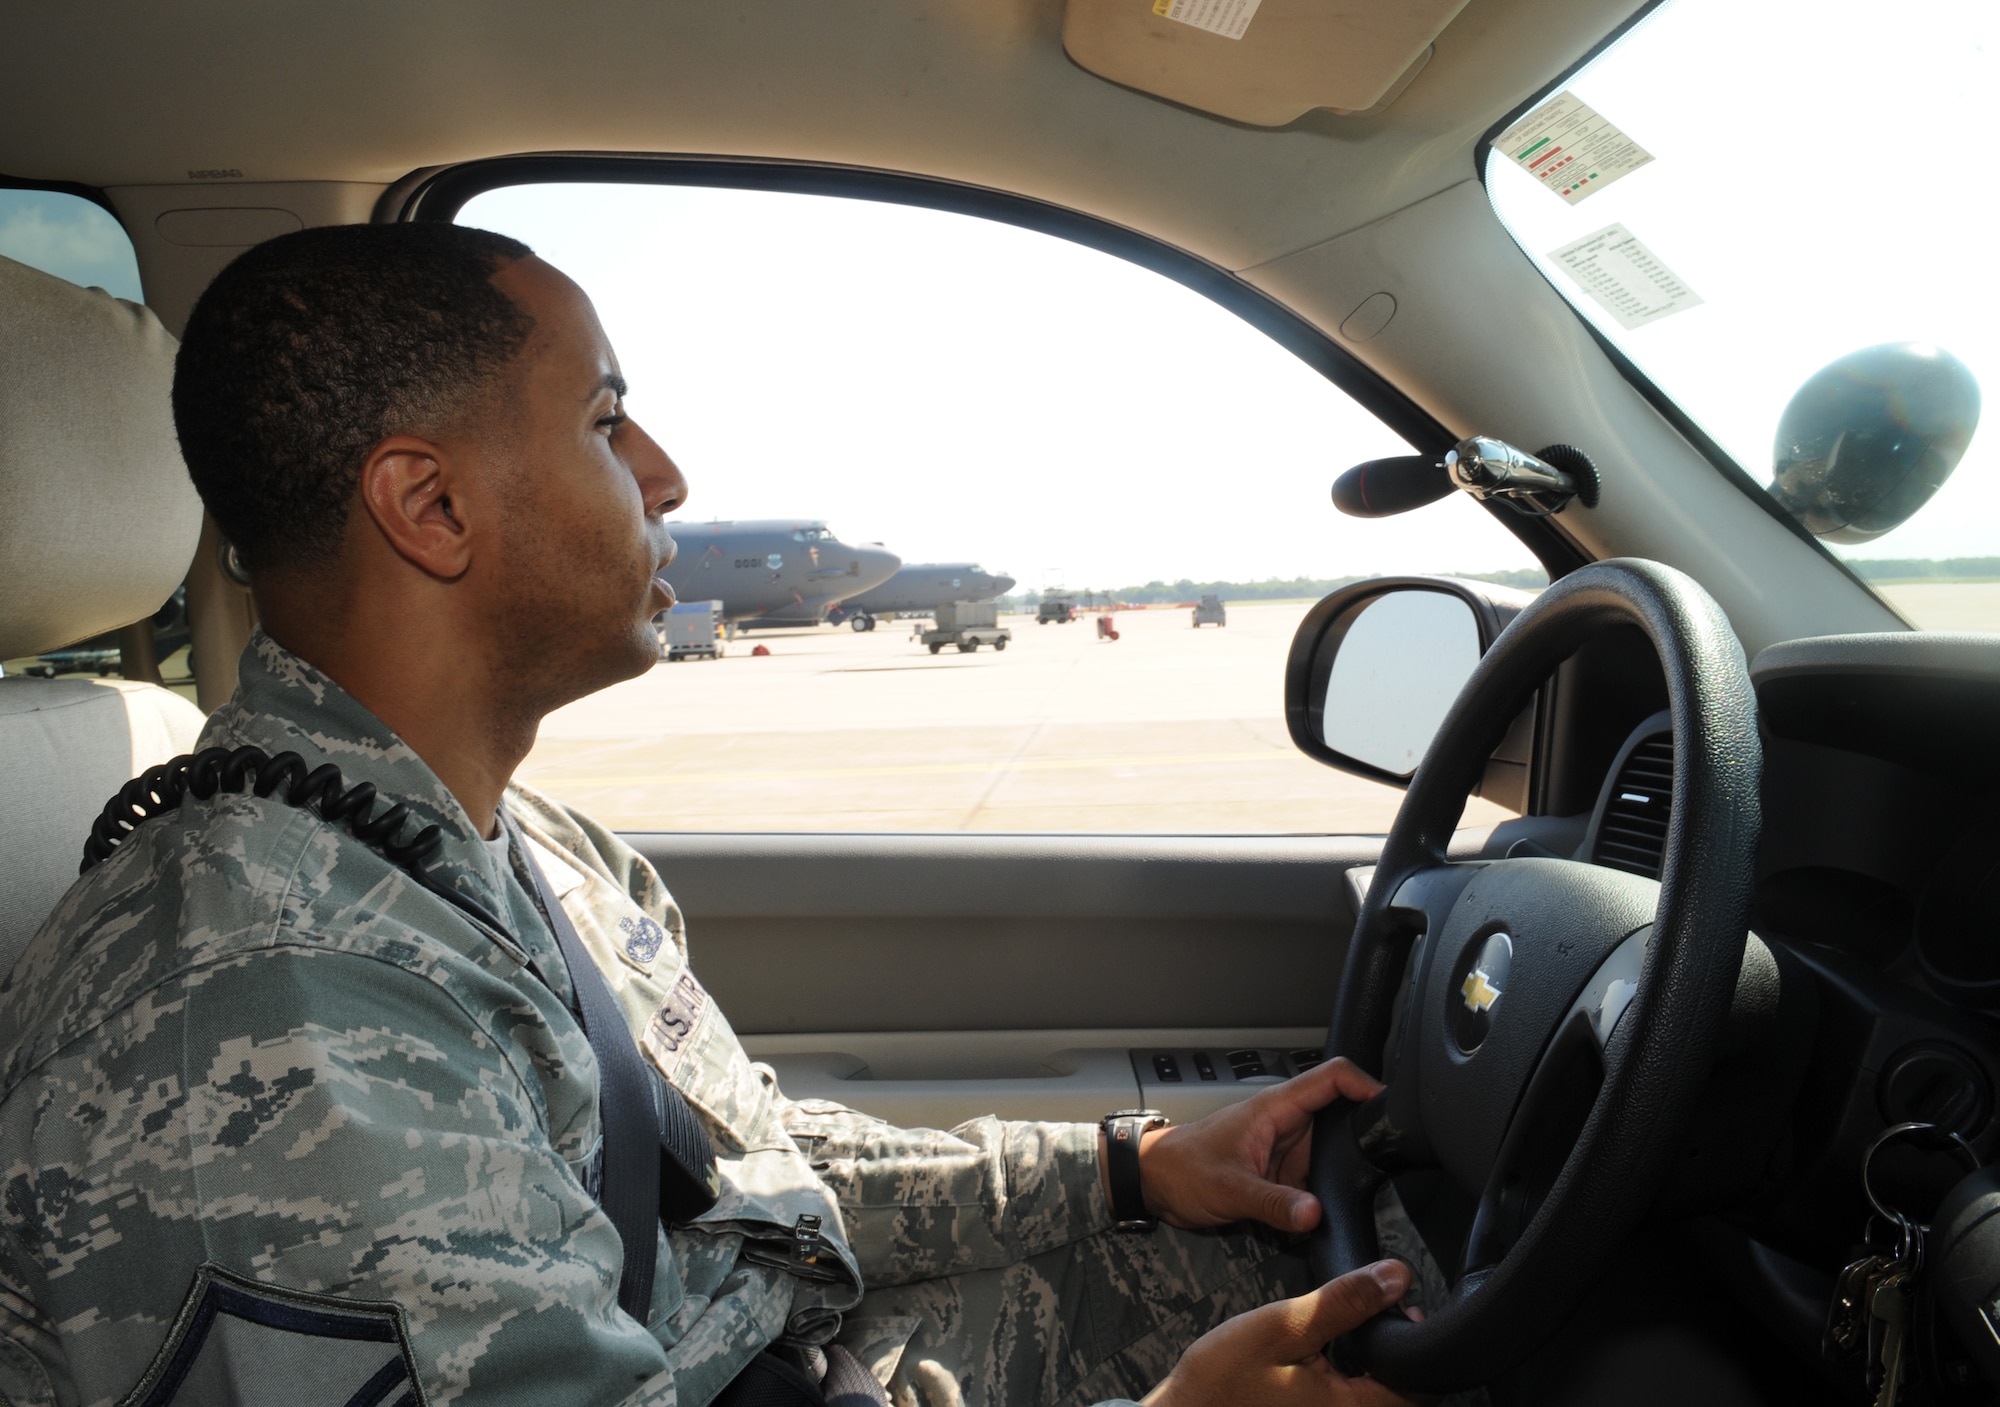 Master Sgt. Andre McBride, 2nd Security Forces Squadron flight chief, patrols the flightline on Barksdale Air Force Base, La., Aug. 10. When patrolling the flightline, 2 SFS Airmen ensure no one is tampering with the aircraft. They also ensure that personnel with restricted area access have their credentials and that visitors are being properly escorted. (U.S. Air Force photo/Airman 1st Class Benjamin Gonsier)(RELEASED)